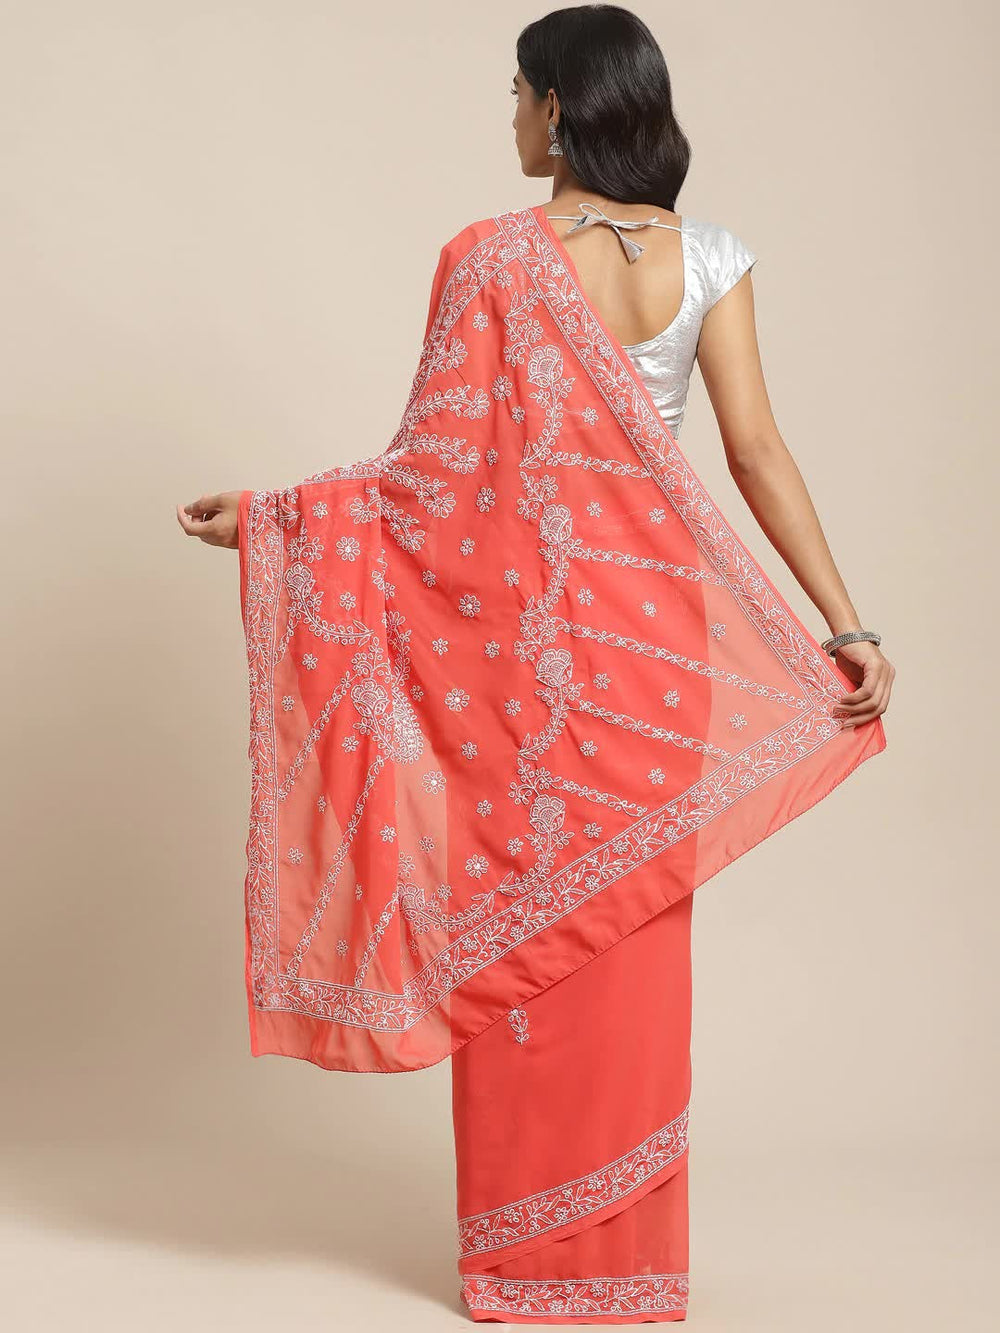 Pink-Faux-Lucknow-Chikan-Saree-With-Blouse